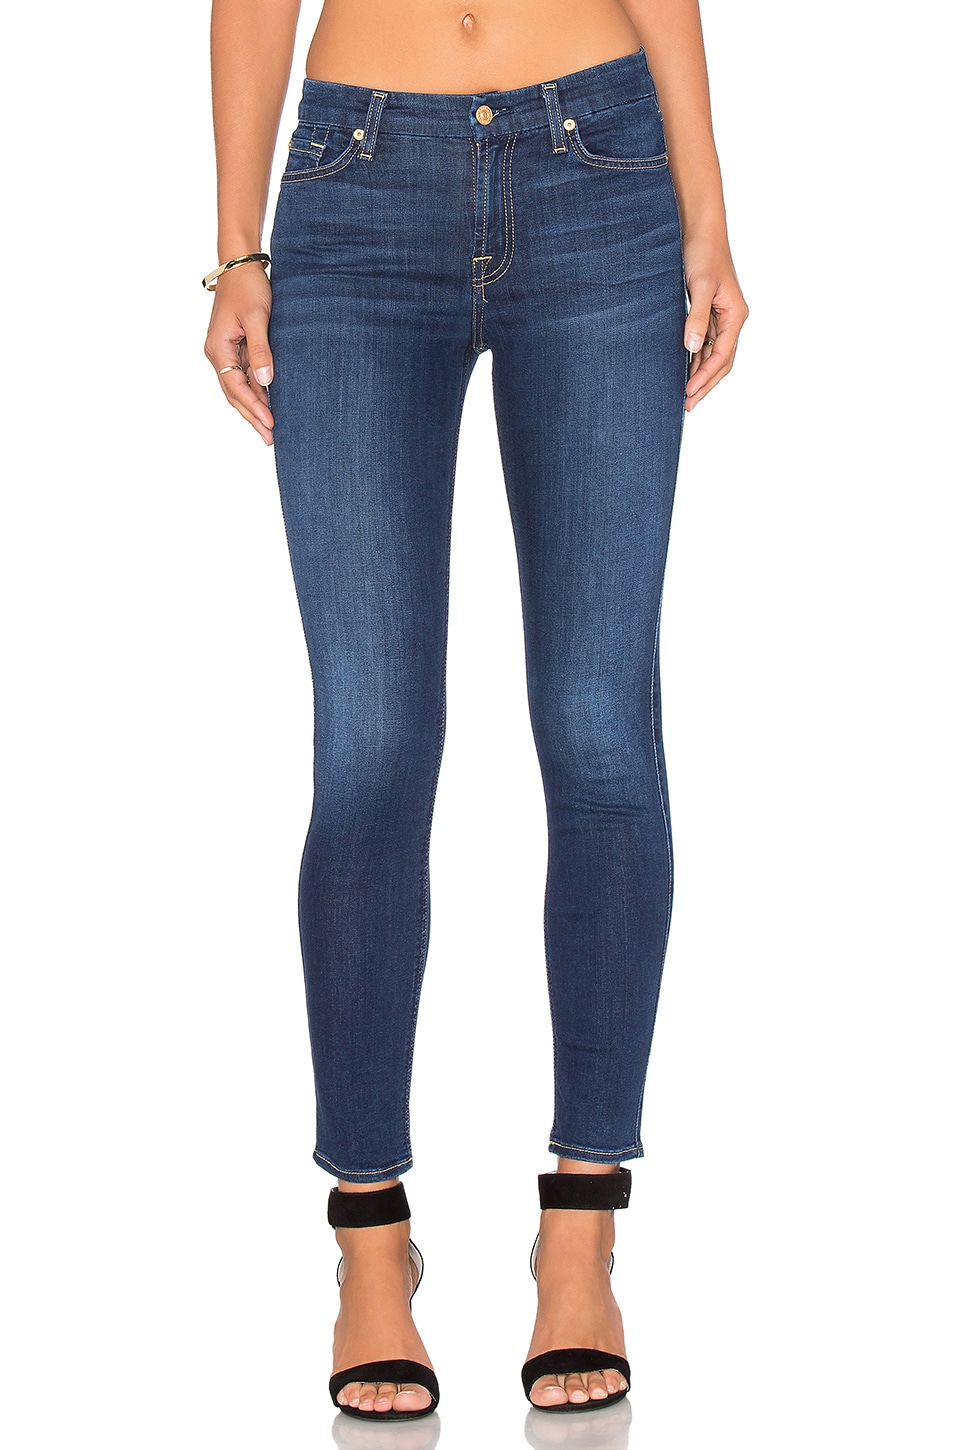 7 For All Mankind b(air) Ankle Skinny in Duchess | REVOLVE